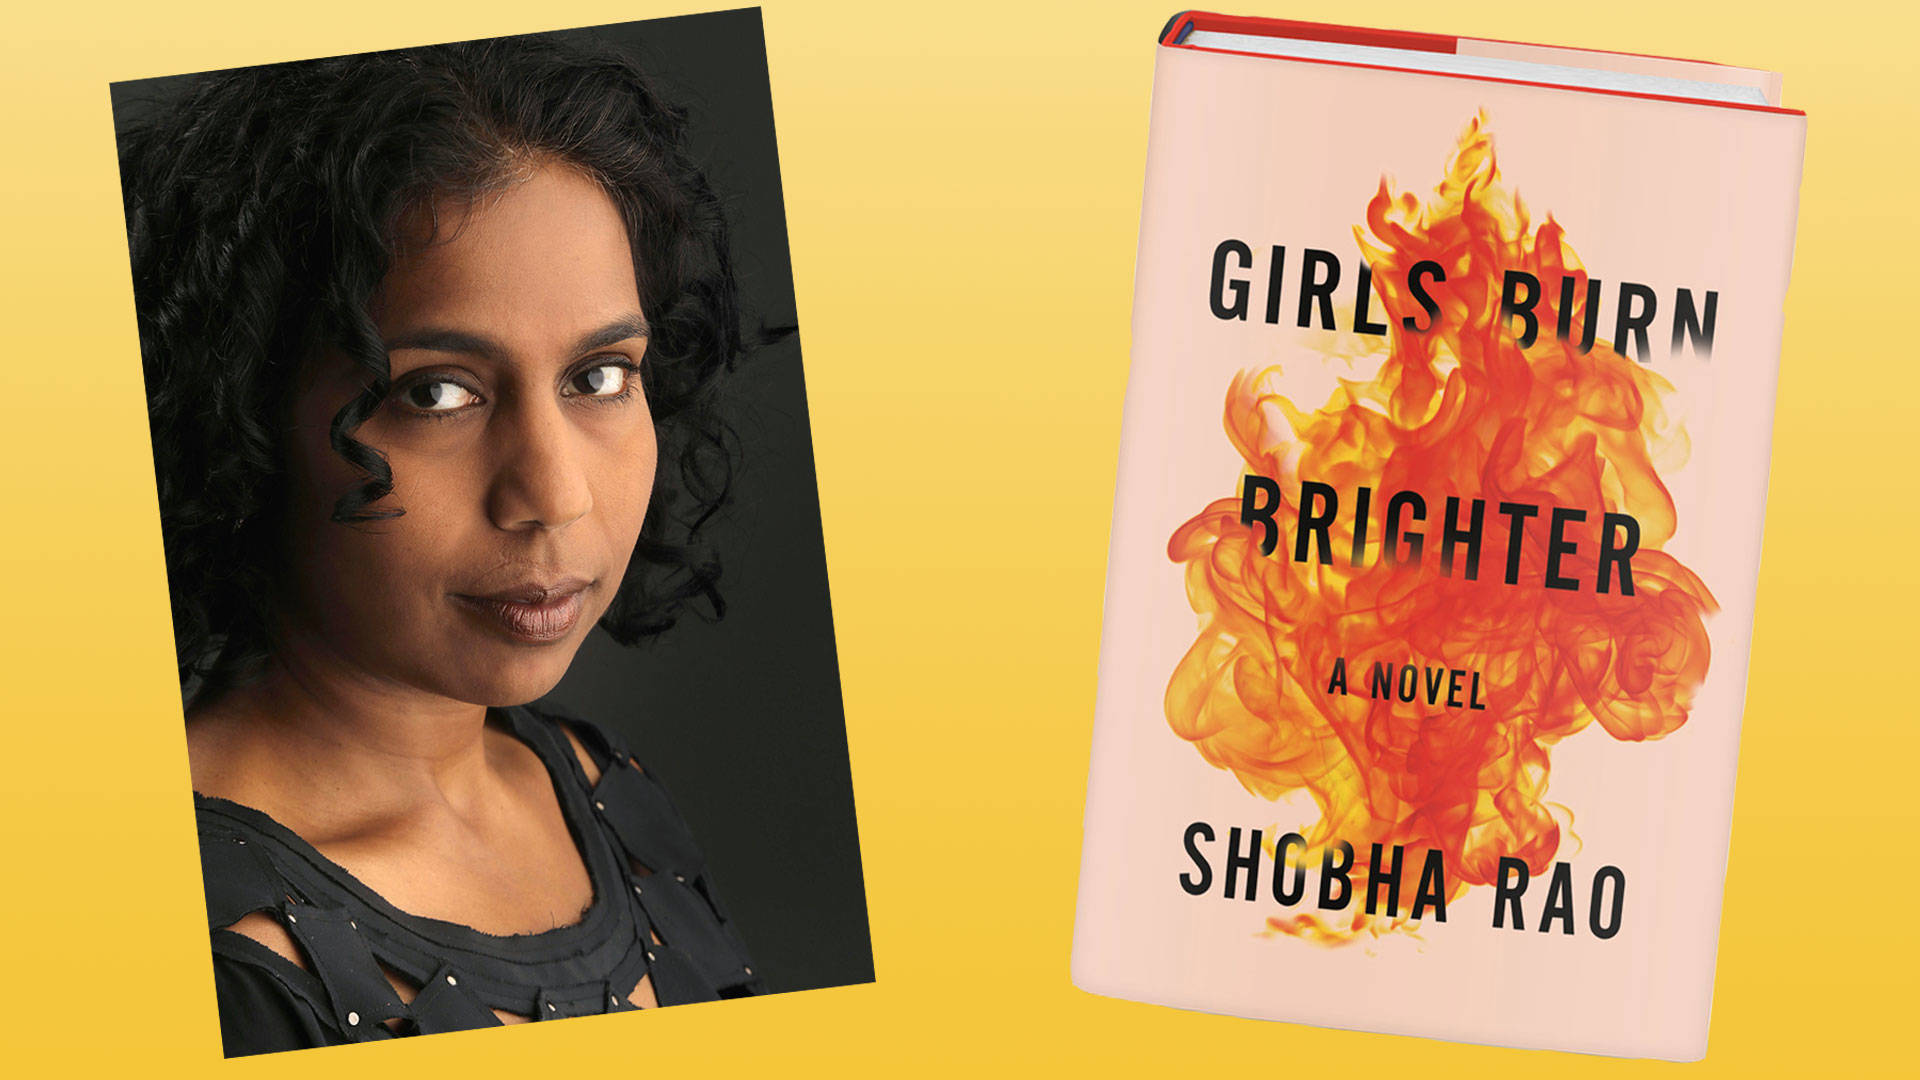 Shobha Rao's 'Girls Burn Brighter' is about the strength of young female friendship in the face of a patriarchal society.